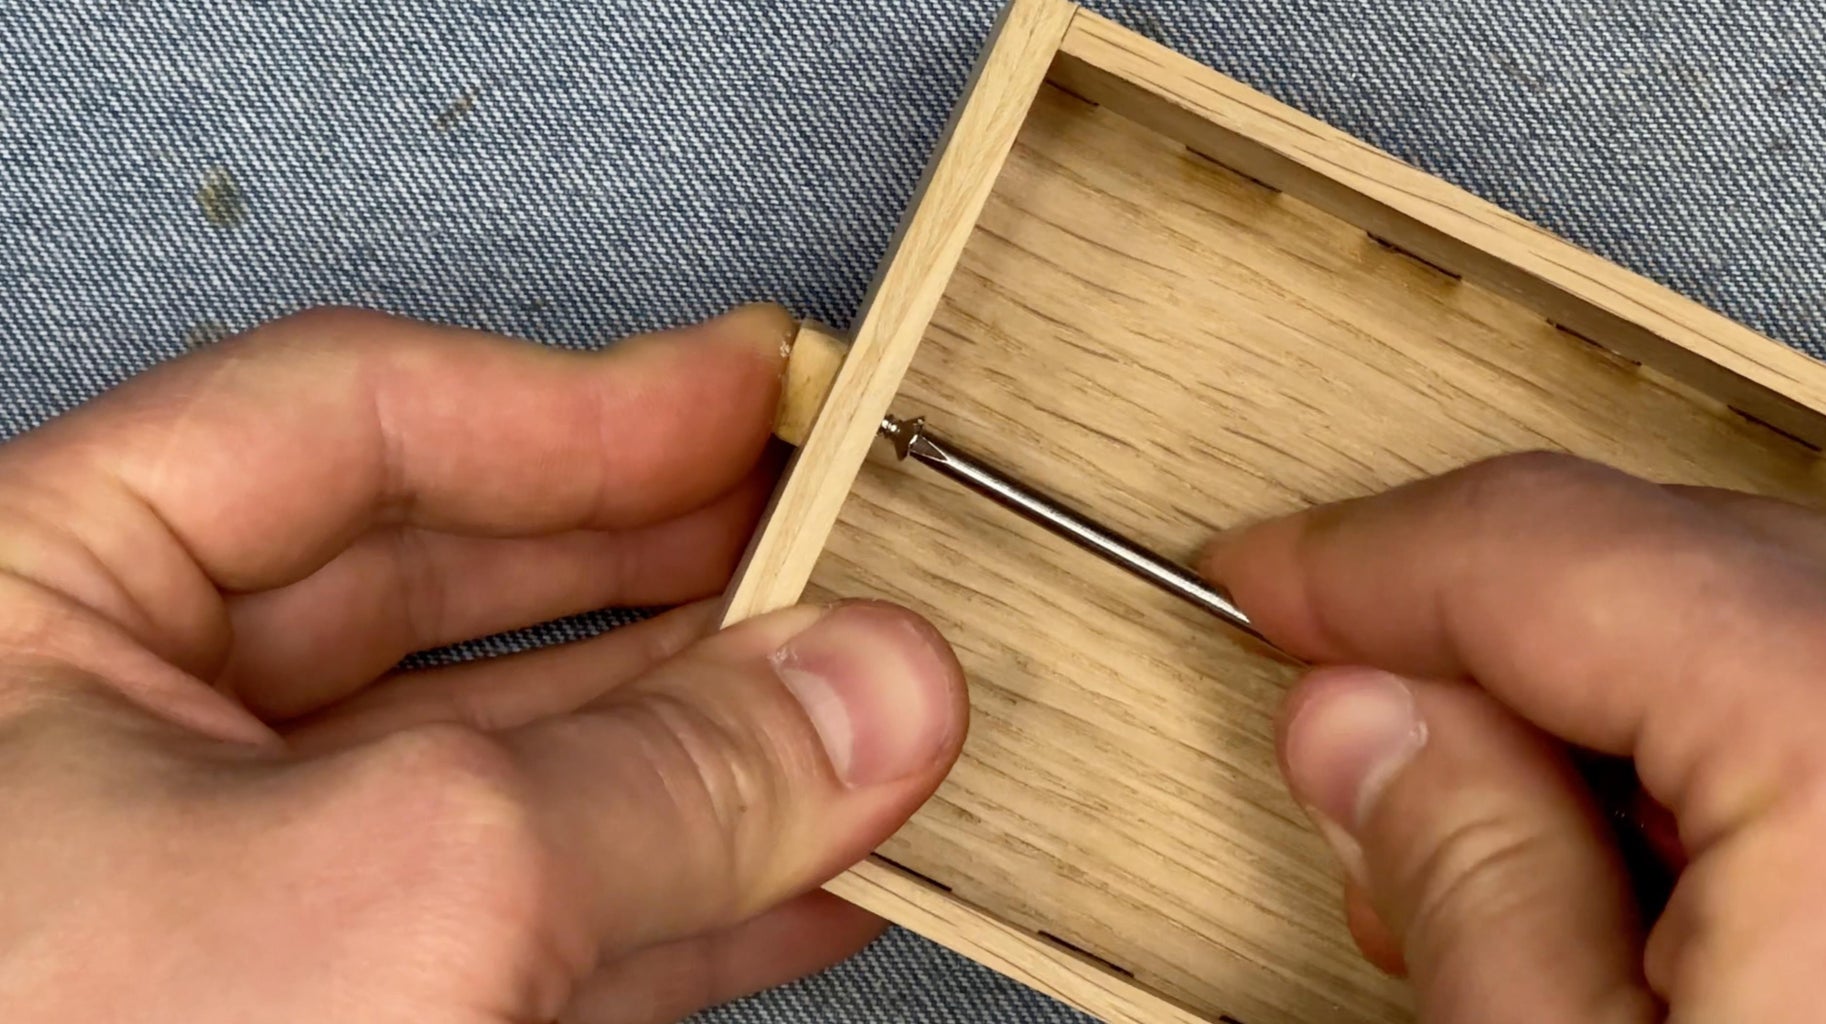 Attach a Small Piece of Wood As a Handle